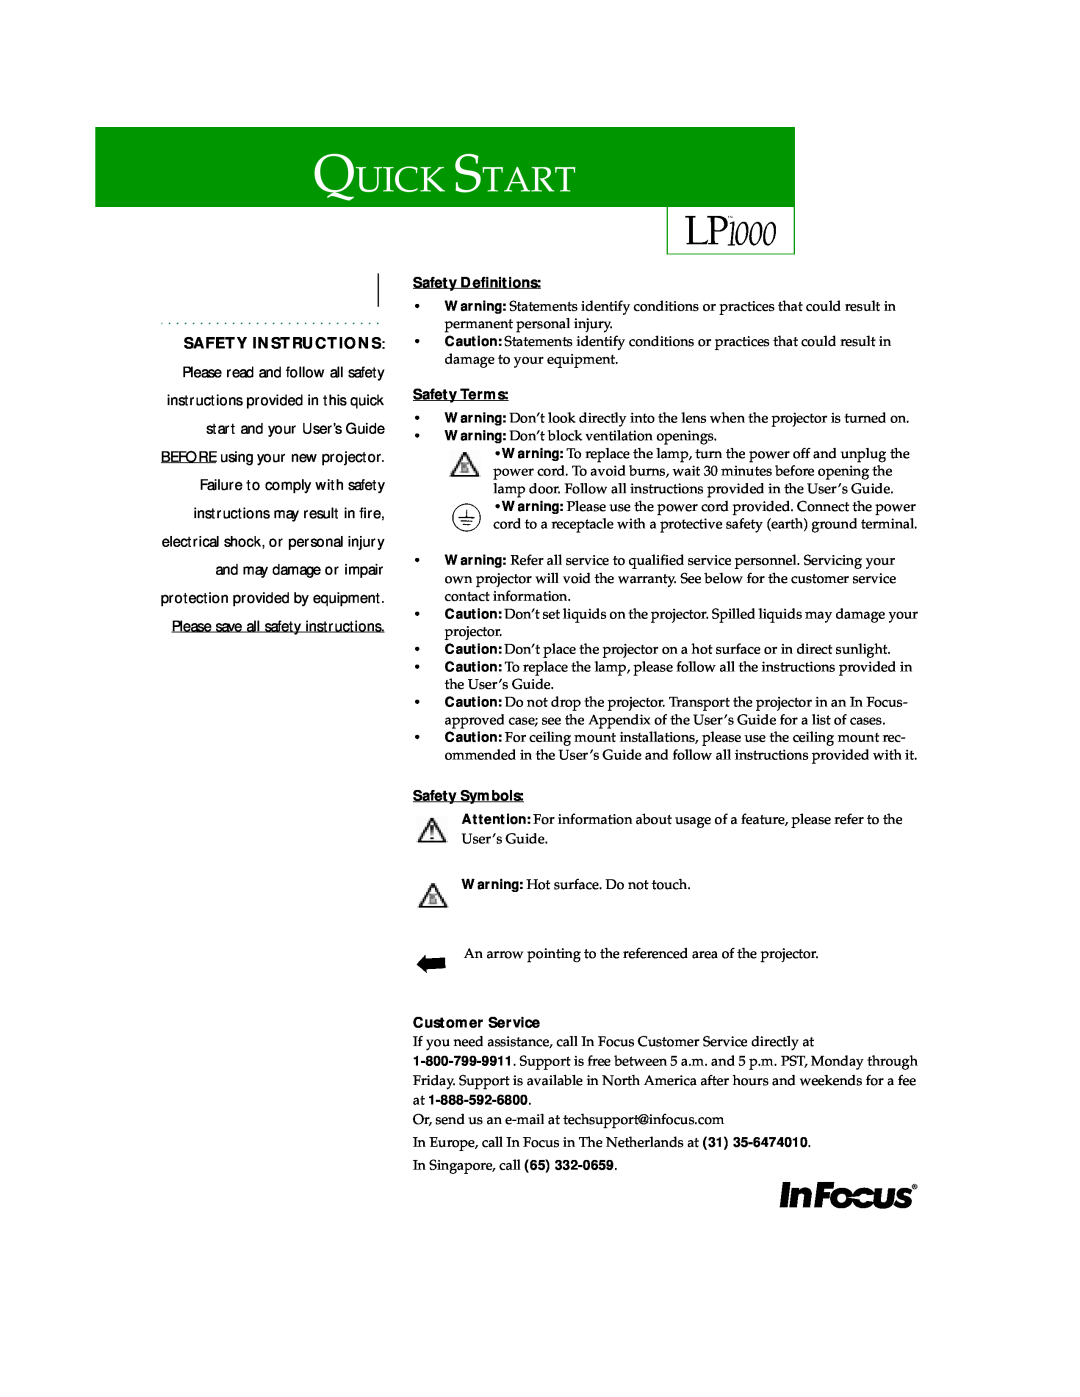 InFocus 1000 quick start Quick Start, Safety Definitions, Safety Terms, Safety Symbols, Customer Service 